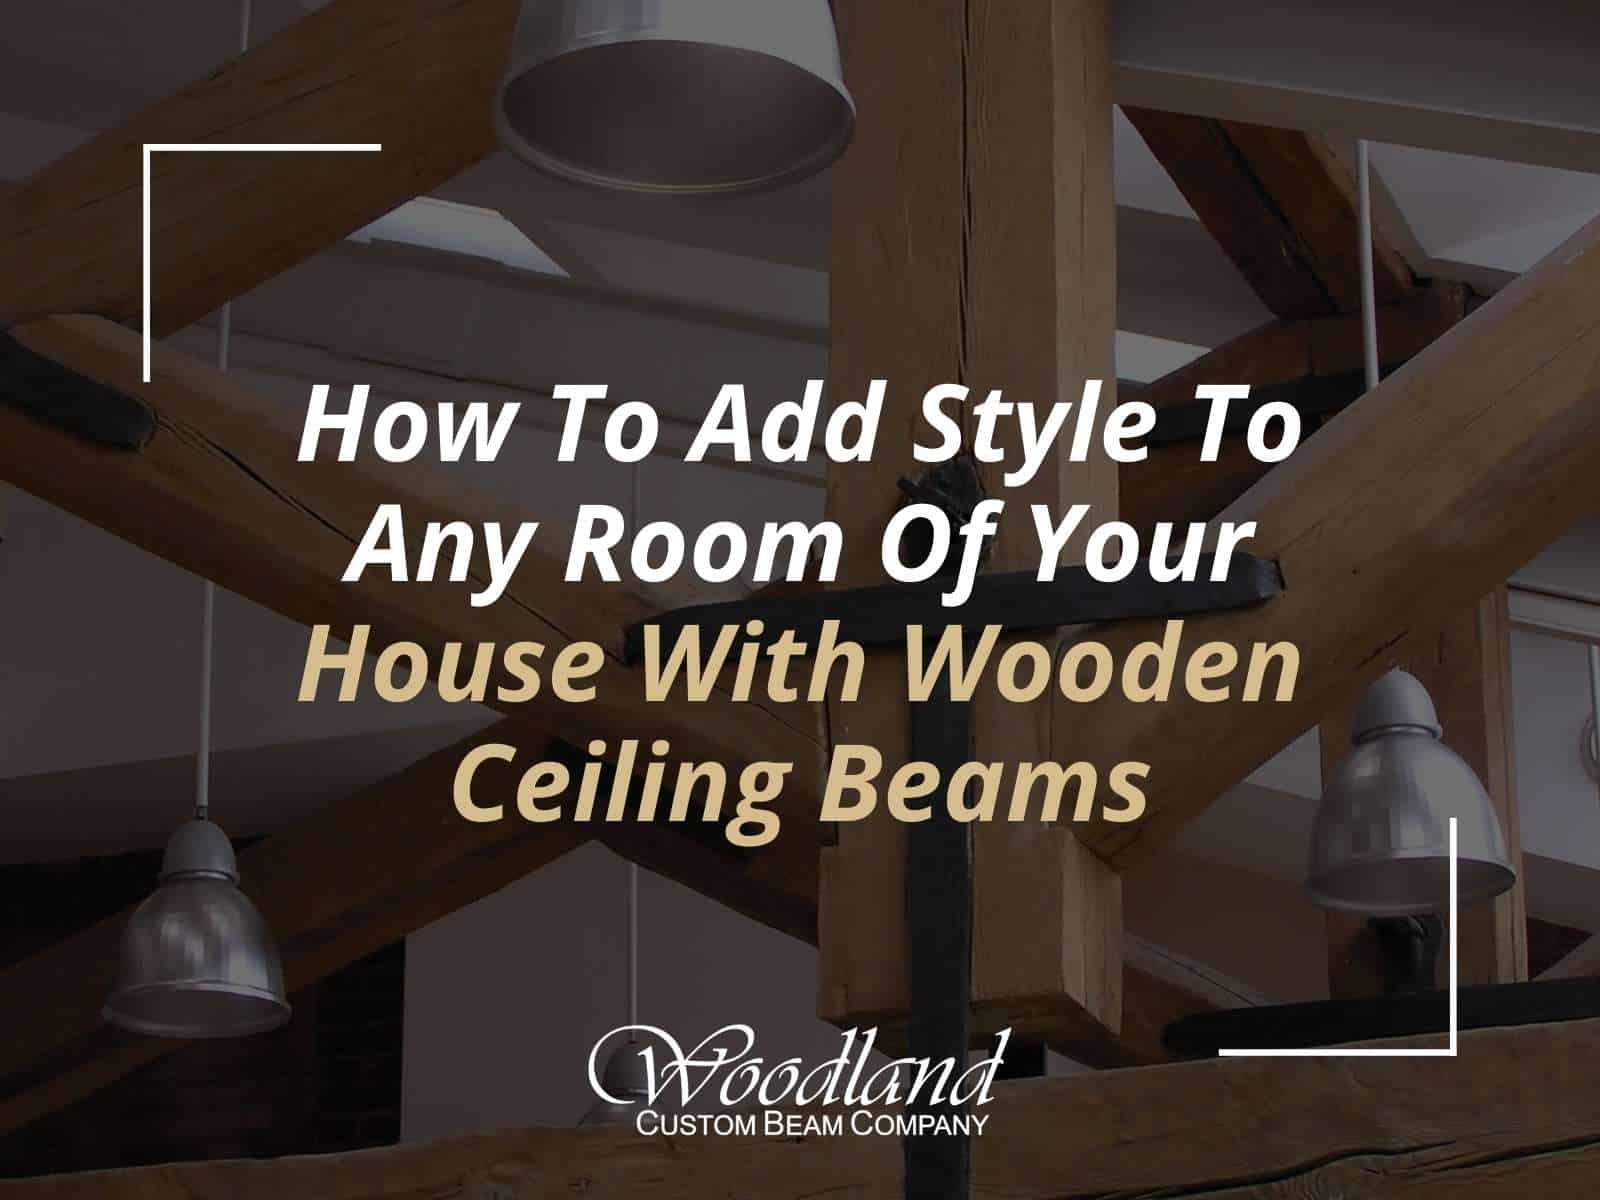 How To Add Style To Any Room Of Your House With Wooden Ceiling Beams